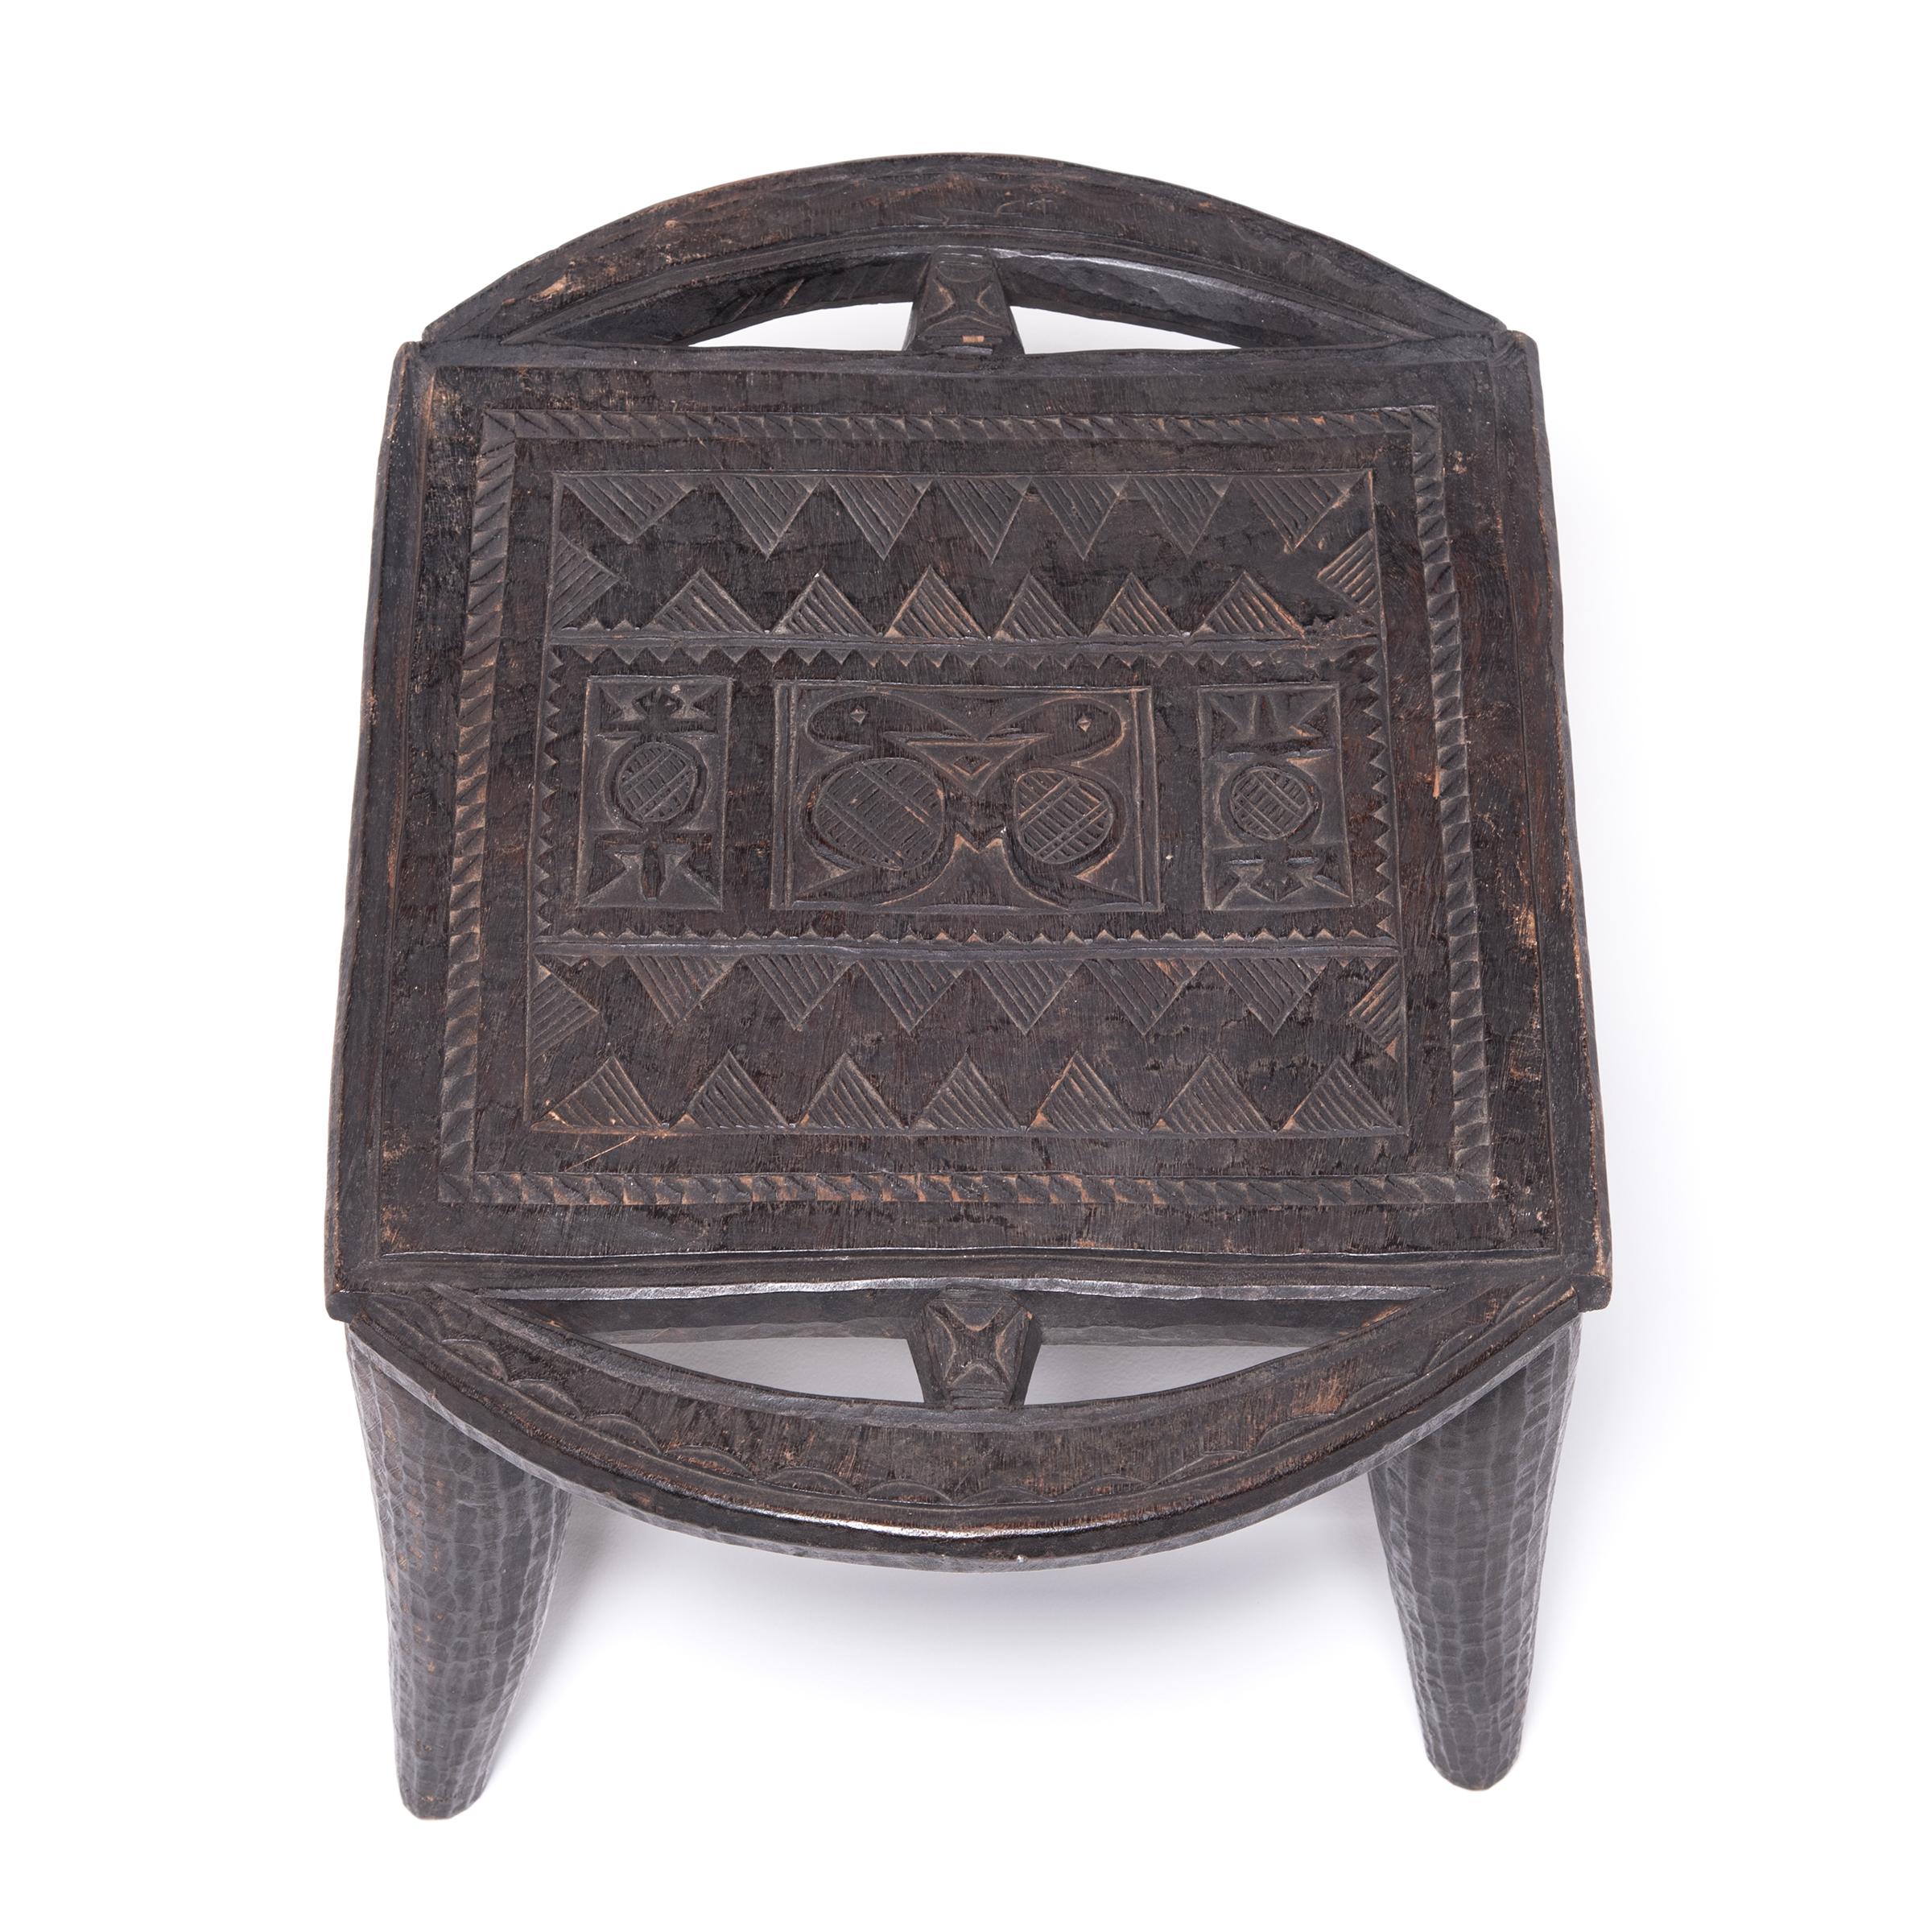 Wood Early 20th Century Nigerian Nupe Stool with Animal Motifs